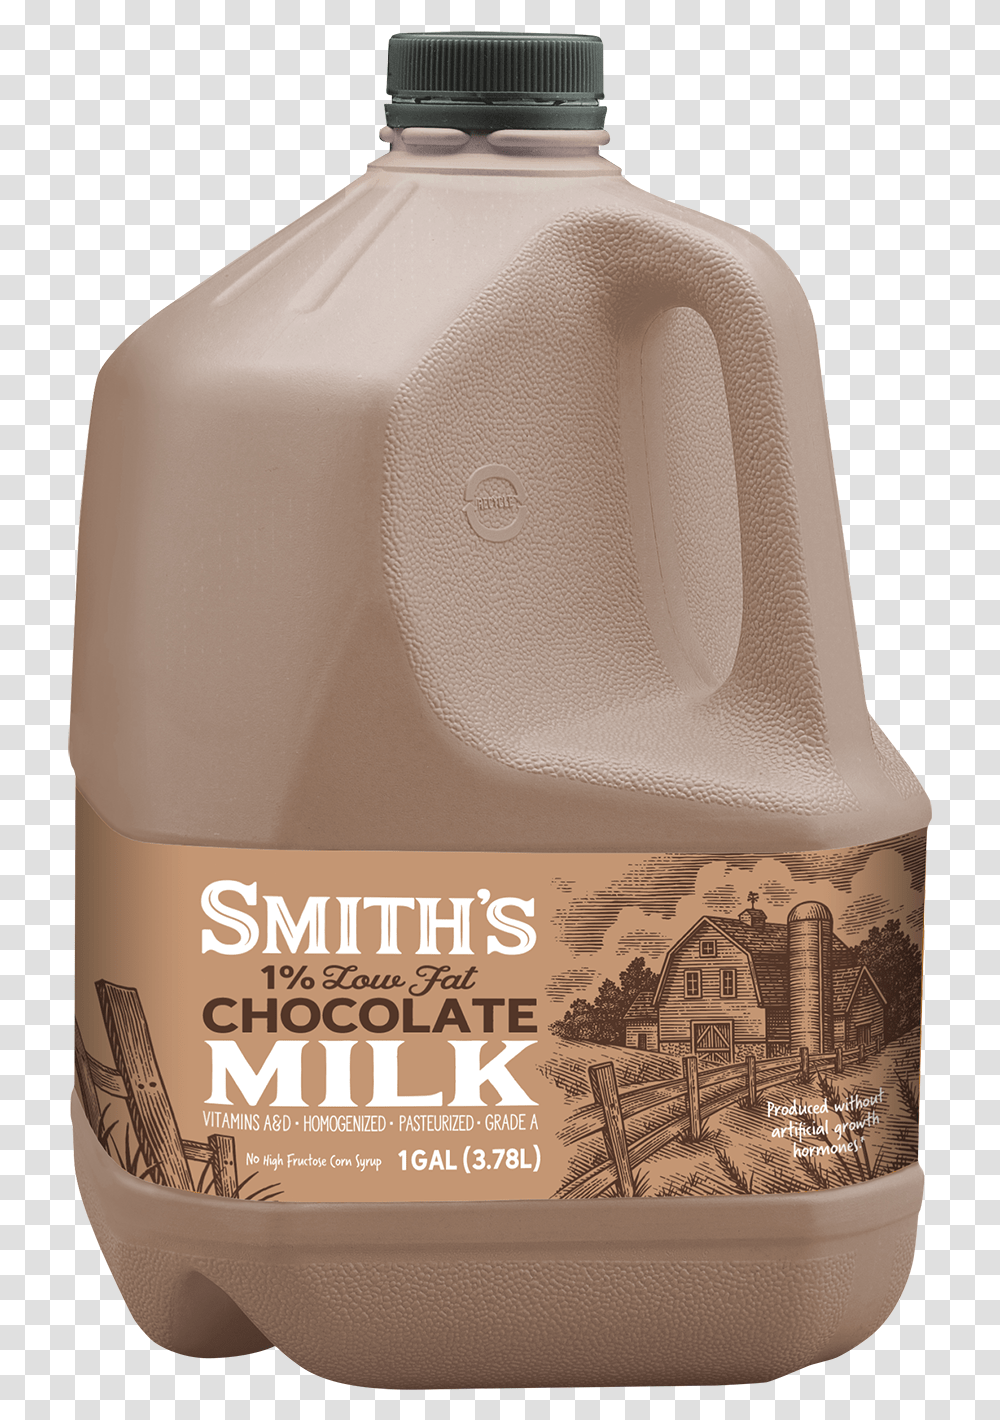 Smiths Chocolate Milk Gal, Bottle, Cosmetics, Lotion, Shampoo Transparent Png